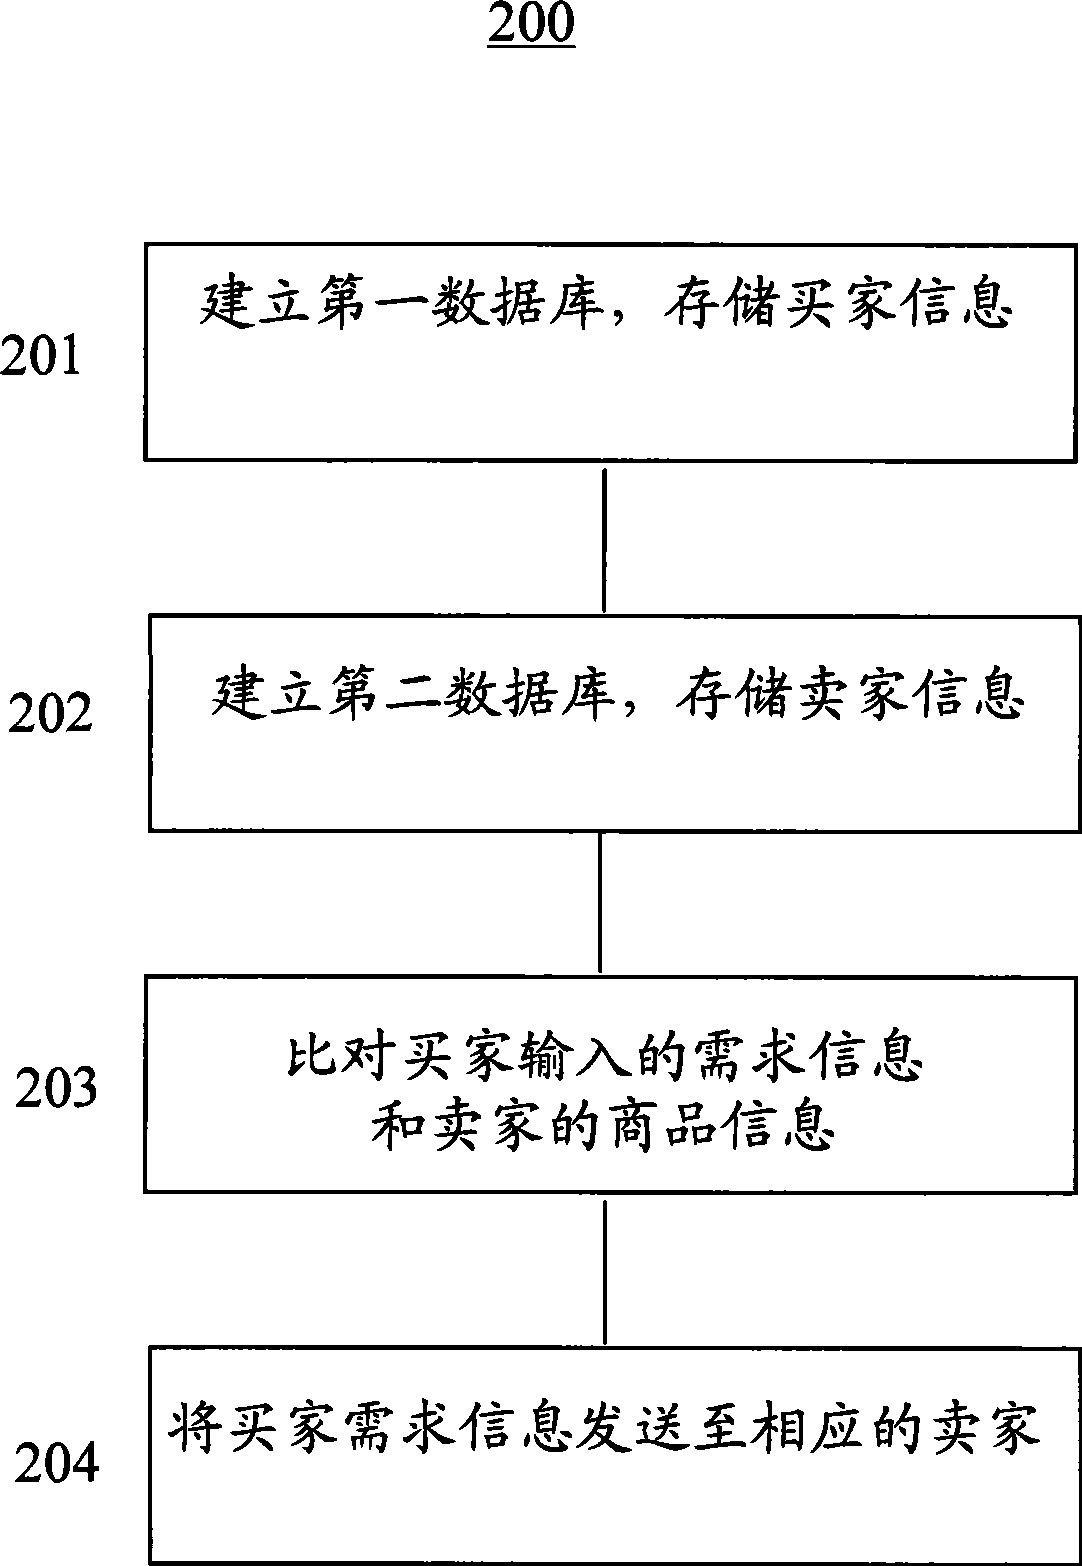 Business transaction system and method capable of receiving external data and processing